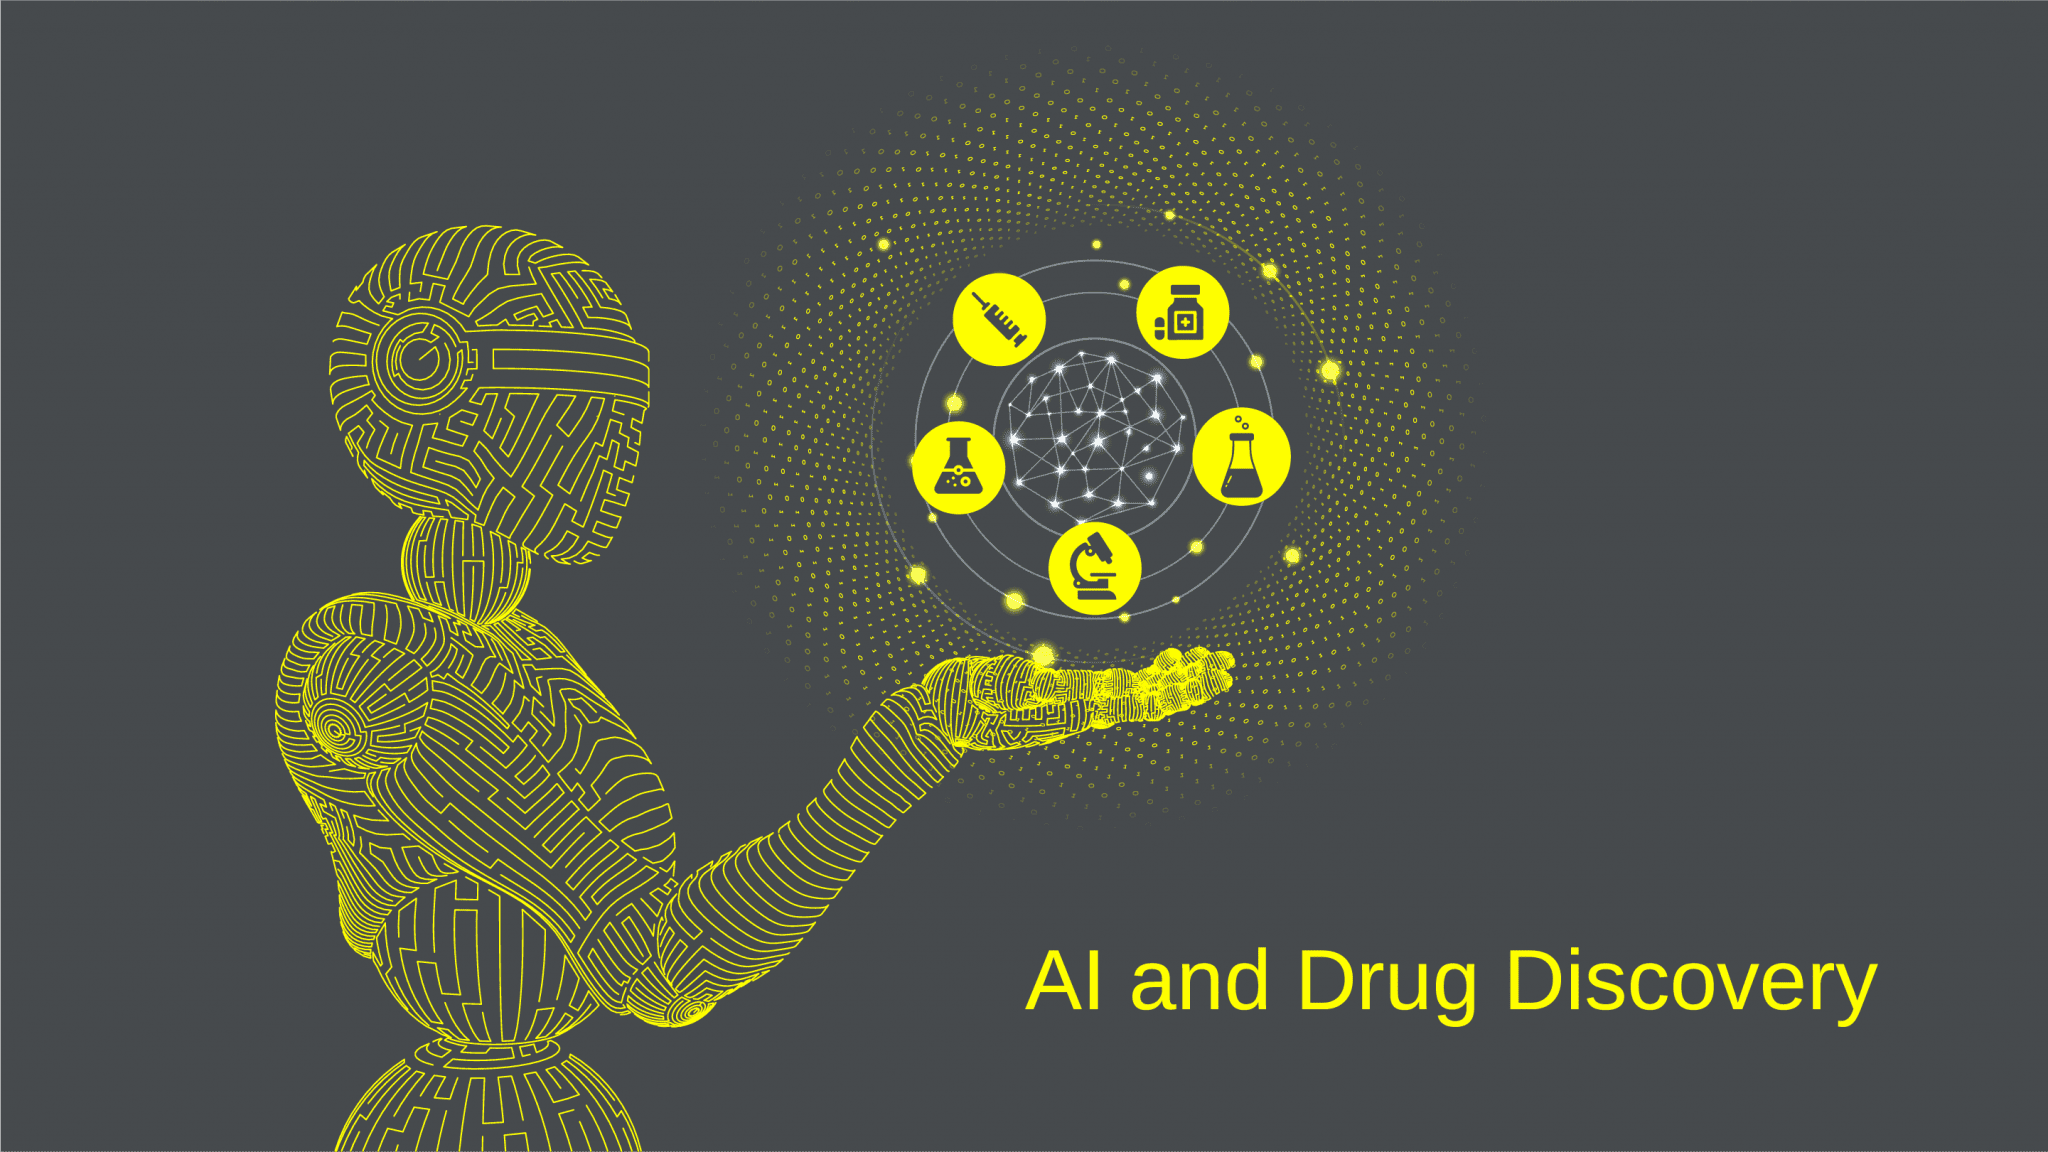 Introduction to Artificial Intelligence in Drug Discovery